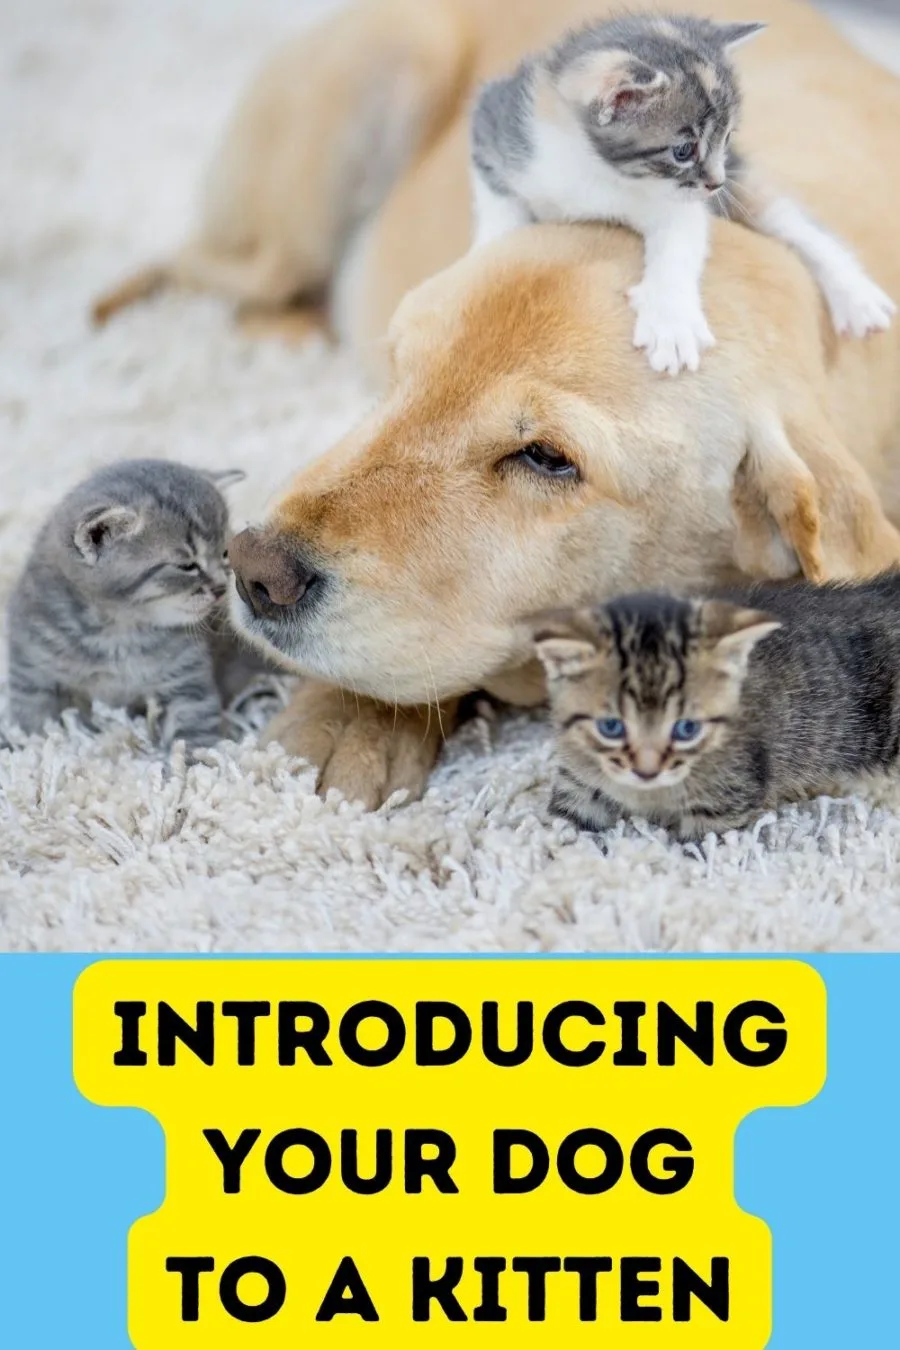 Introducing Your Dog to a Kitten: 5 Important Tips!